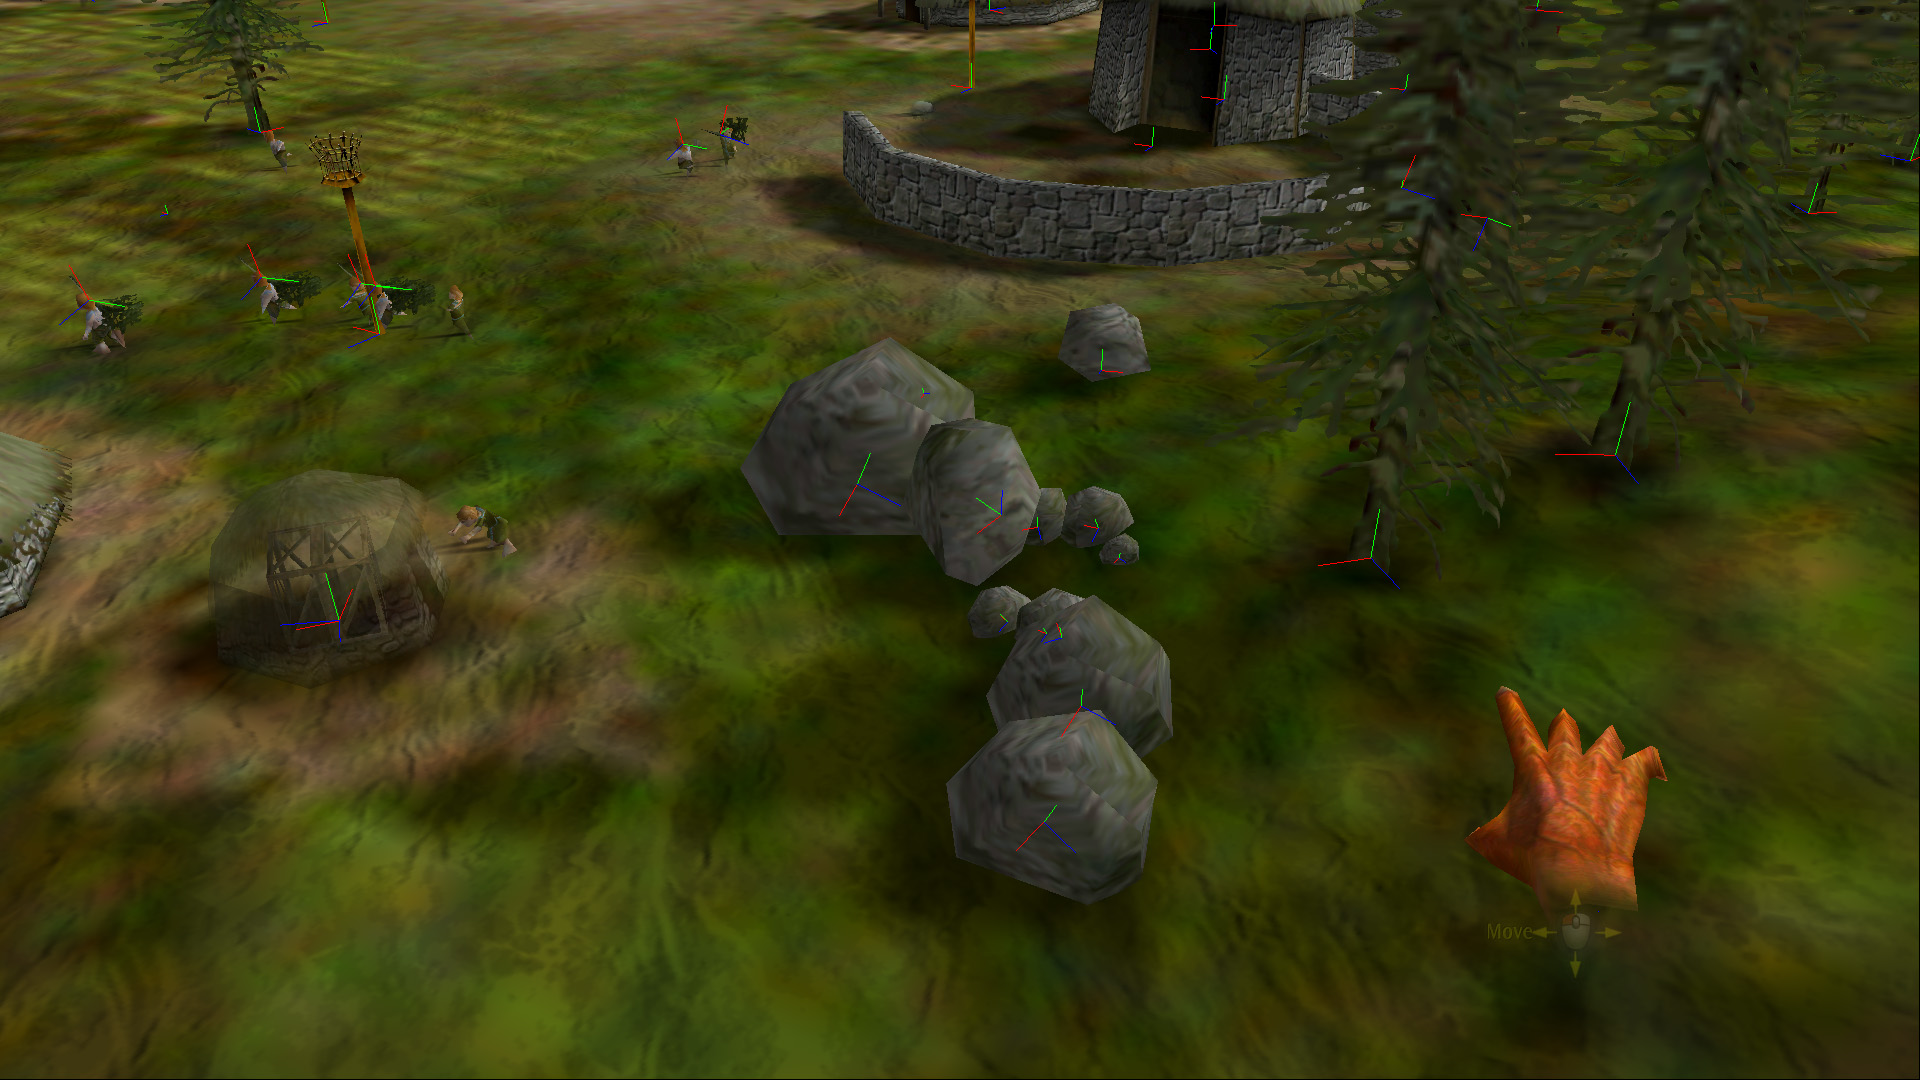 Game screenshot with visible euler angles of objects